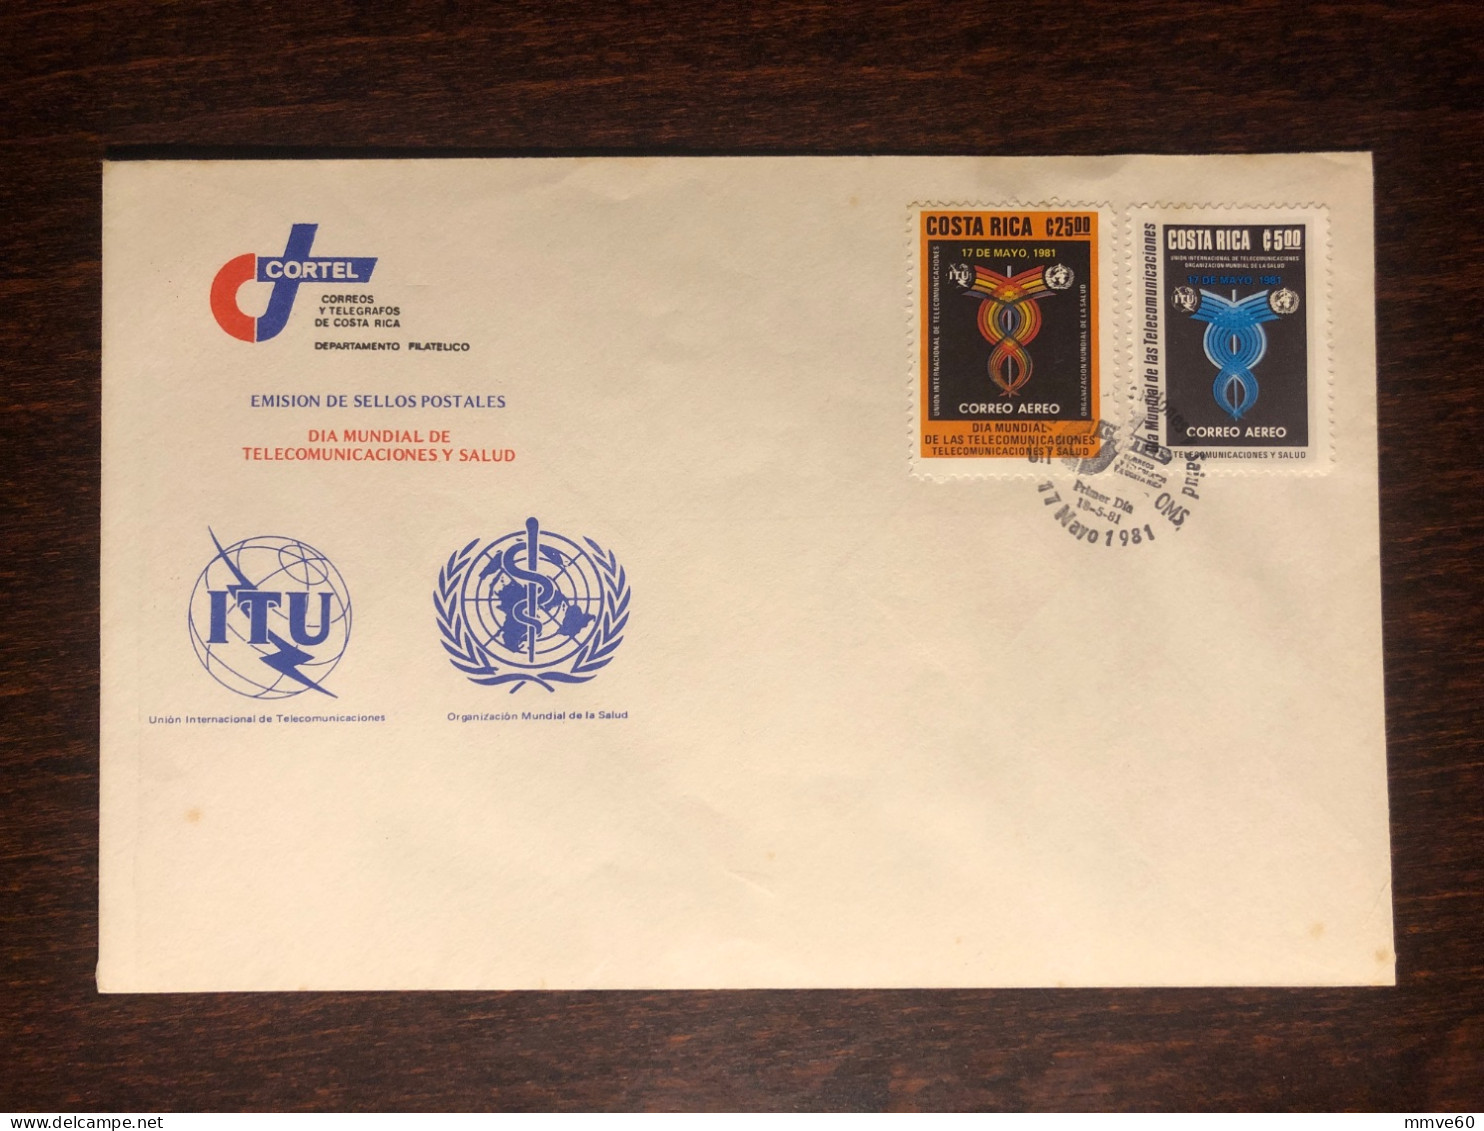 COSTA RICA  FDC COVER 1981 YEAR TELECOMMUNICATIONS AND HEALTH MEDICINE STAMPS - Costa Rica